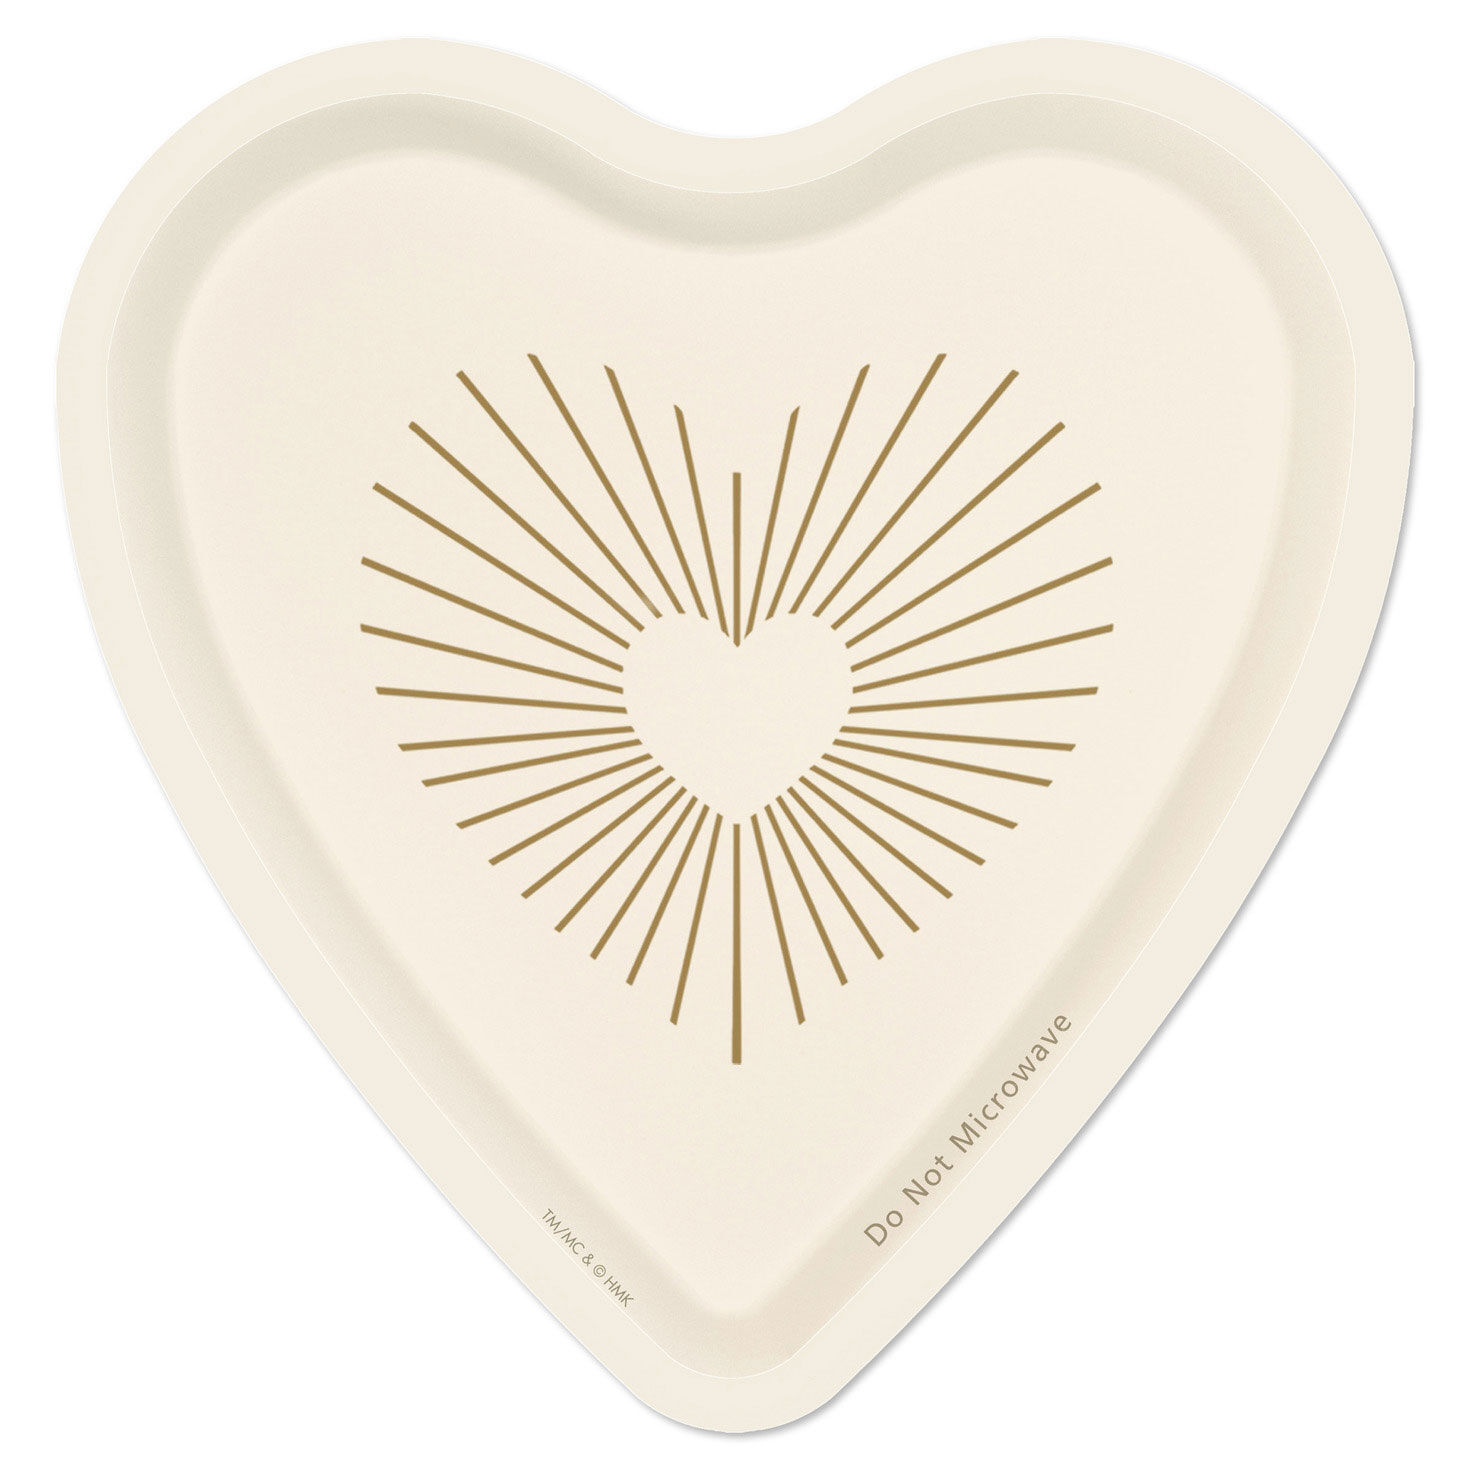 Gold and Ivory Heart-Shaped Dessert Plates, Set of 8 for only USD 4.99 | Hallmark